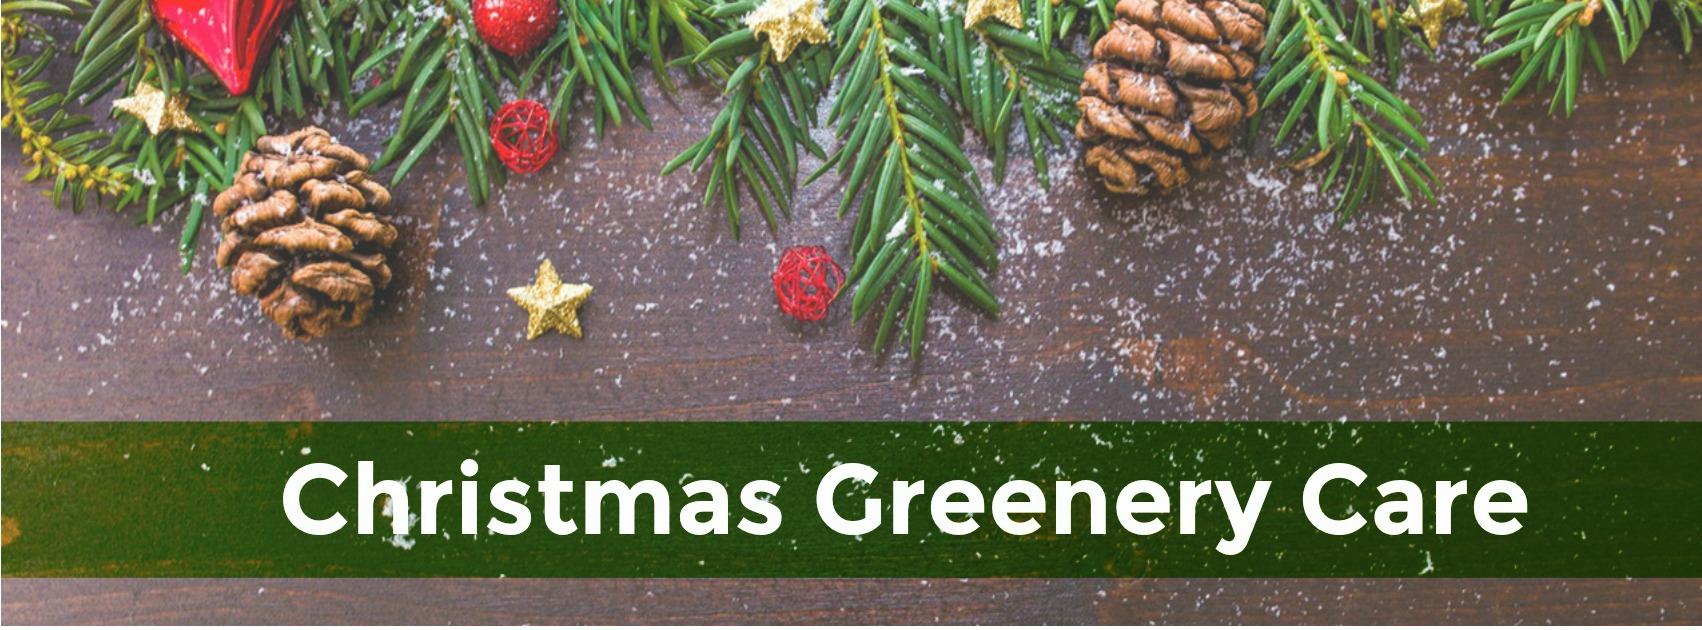 Caring for Christmas Greenery